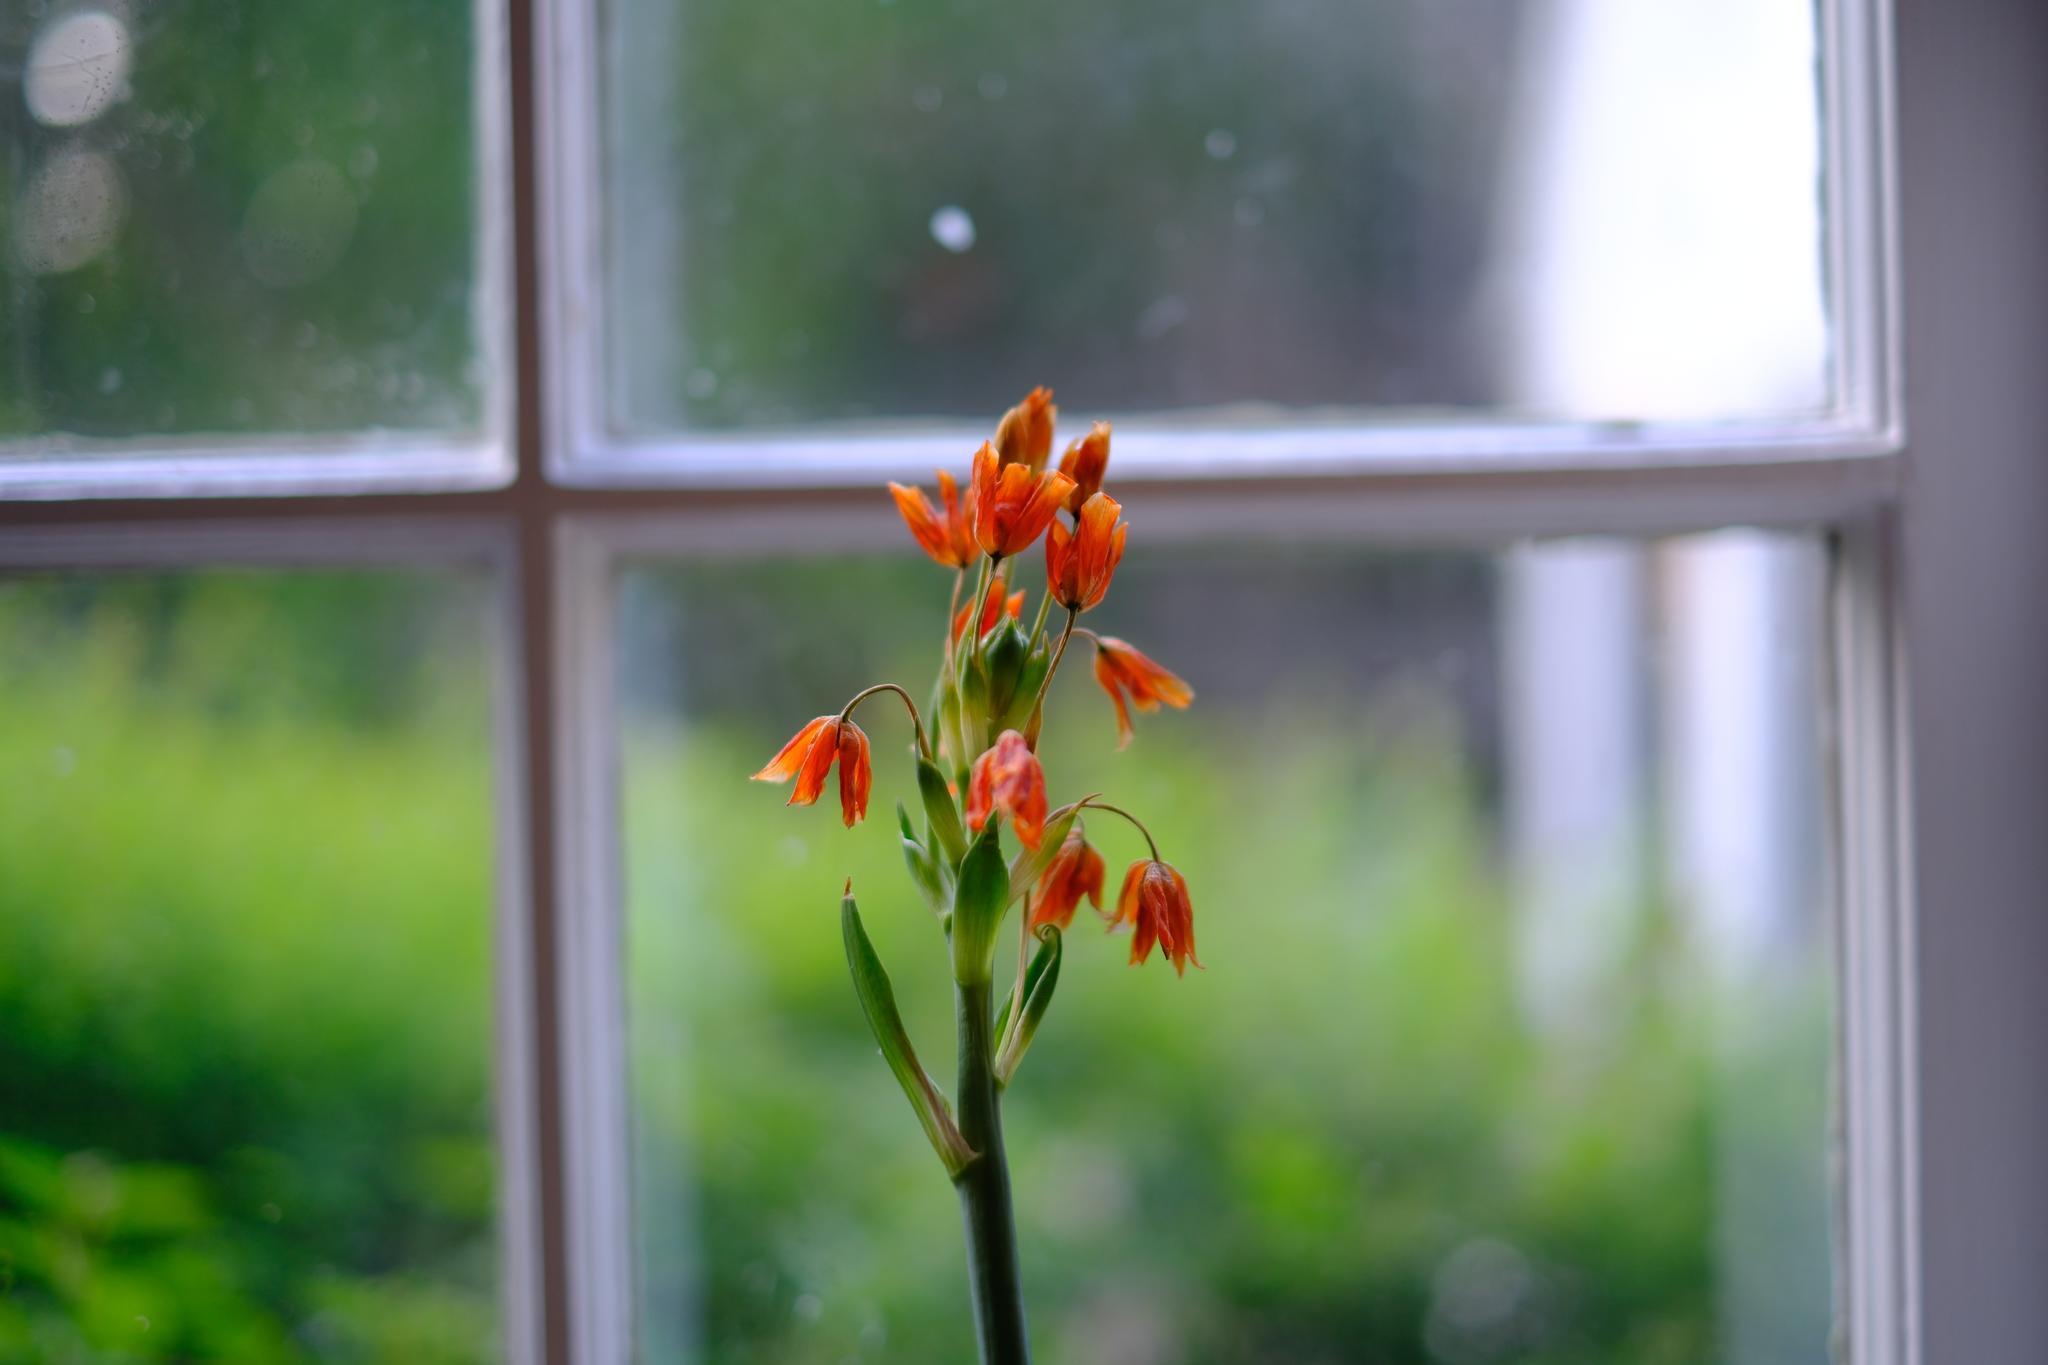 A vibrant orange flower stands in front of a window with a view of greenery outside